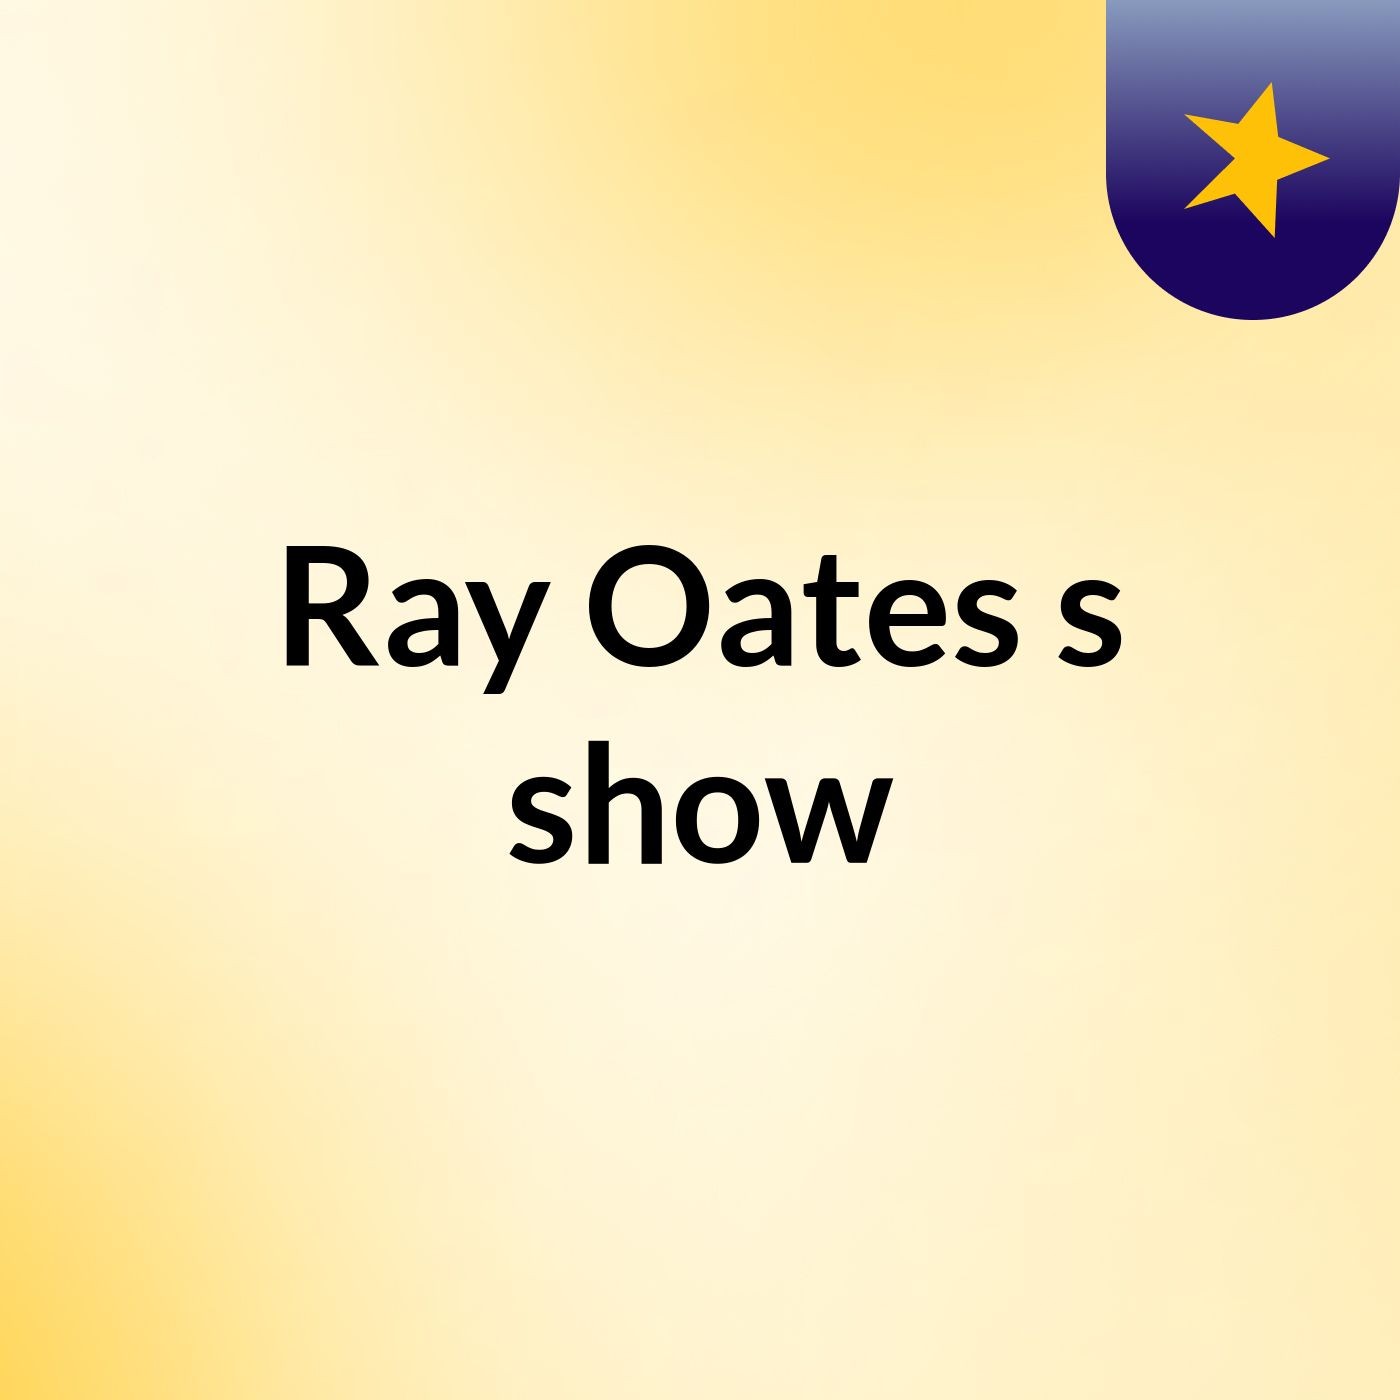 Ray Oates's show